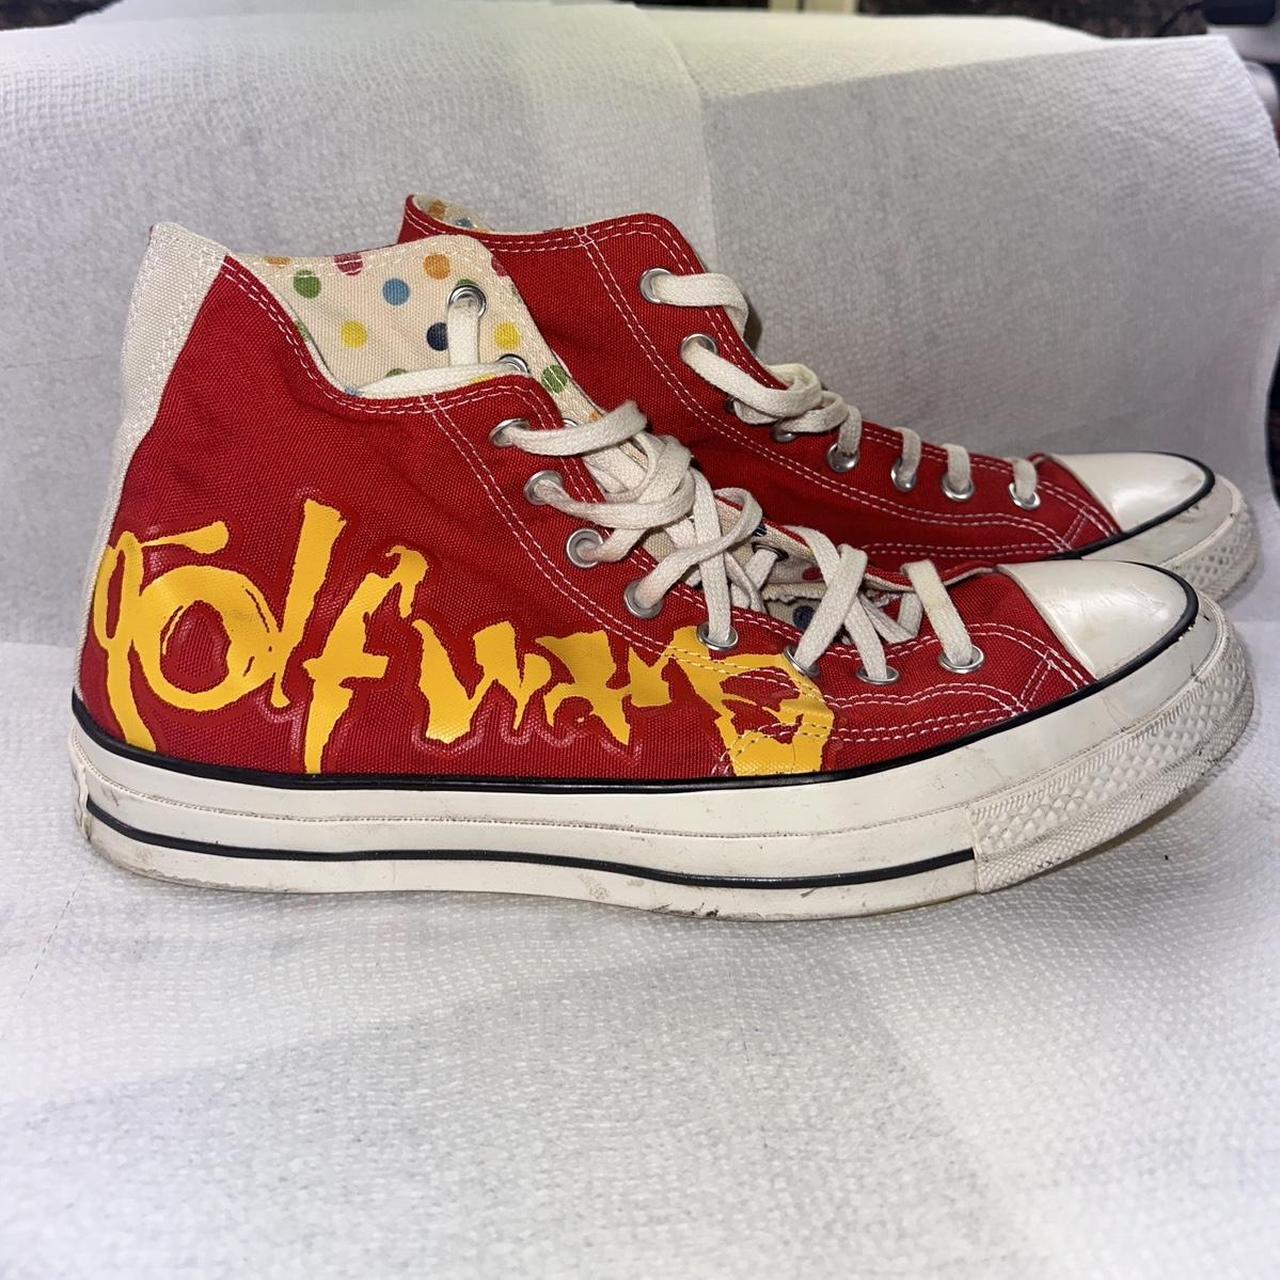 Golfwang x Converse limited edition red and... - Depop